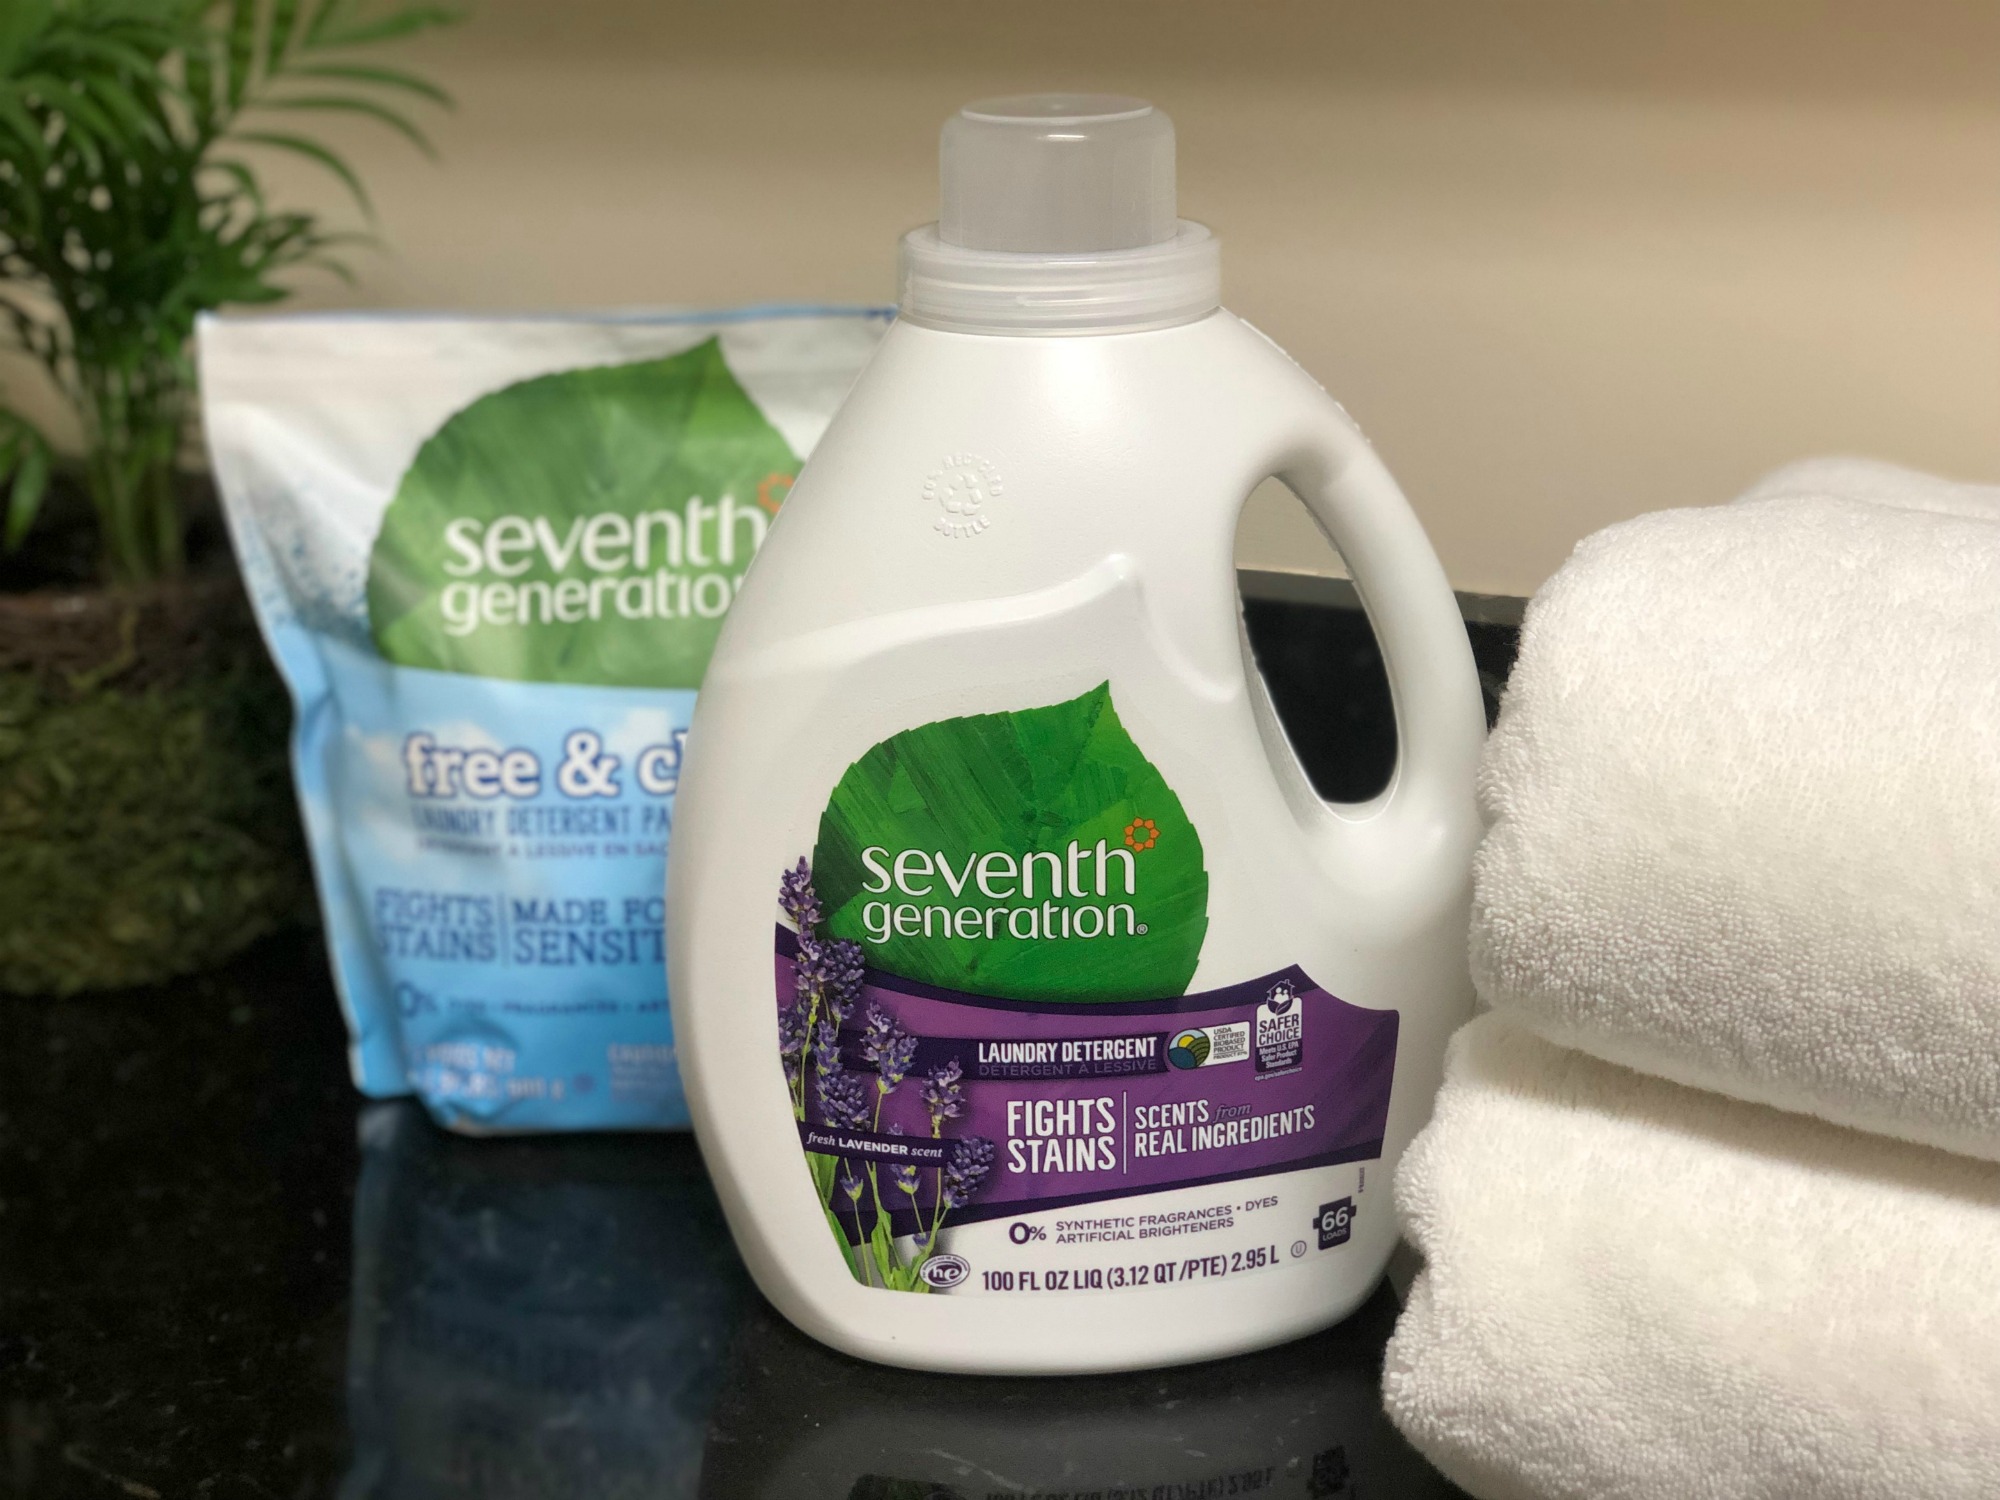 Seventh Generation Laundry Detergent On Sale Now At Publix - Great Time To Stock Up! on I Heart Publix